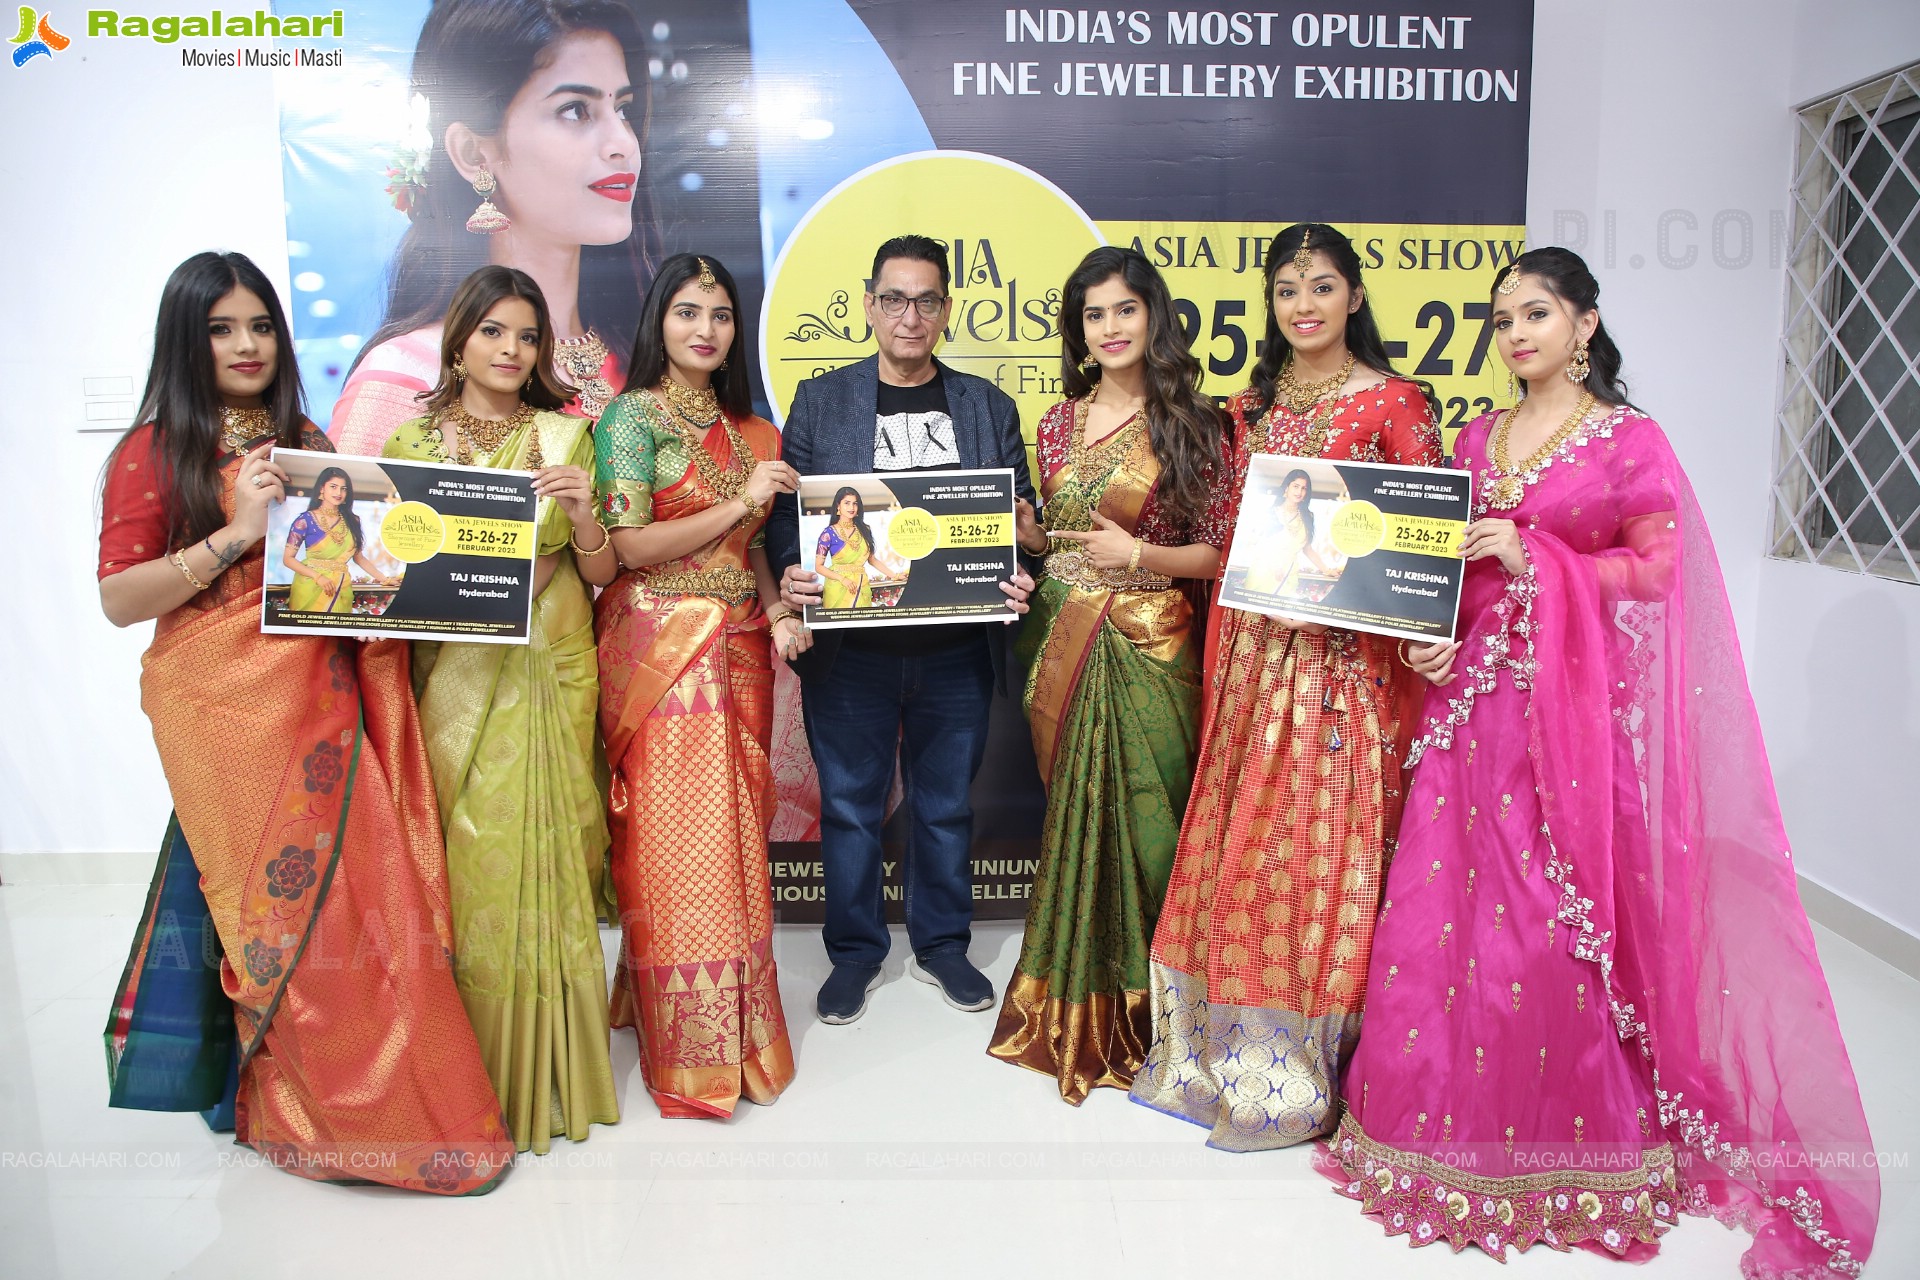 Asia Jewels Show Announcement and Exclusive Wedding & Bridal Jewellery Showcase at Banjara Hills Showroom